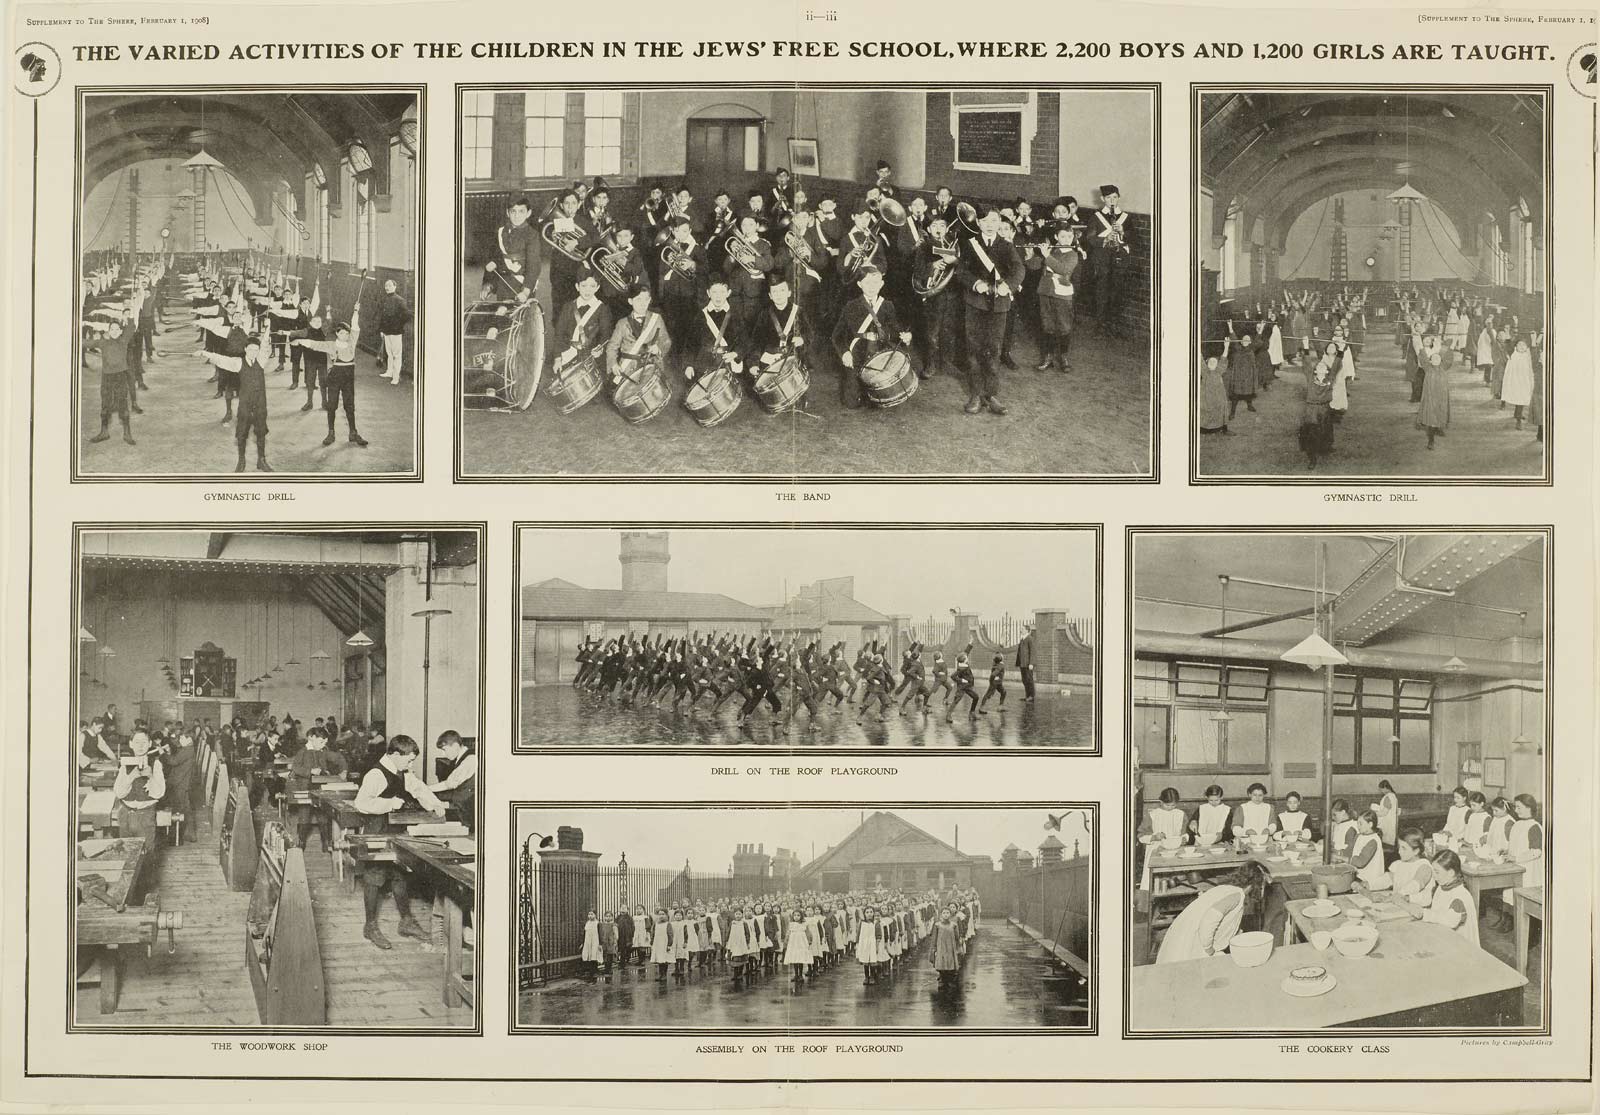 This illustrated article appeared in The Sphere magazine on February 1st 1908. Entitled 'The Largest of Our Elementary Schools Where Russian Jews are made into Good British Subjects', it describes the work of the Jews' Free School in Bell Lane, Spitalfields, the heart of the Jewish East End. By 1908 the school offered free education to 2,200 Jewish boys and 1,200 girls and was the largest school in Europe. Like many Jewish youth organisations in the East End it favoured Anglicisation and integration. Yiddish culture was discouraged to iron out the 'ghetto bend' in immigrant lads.

